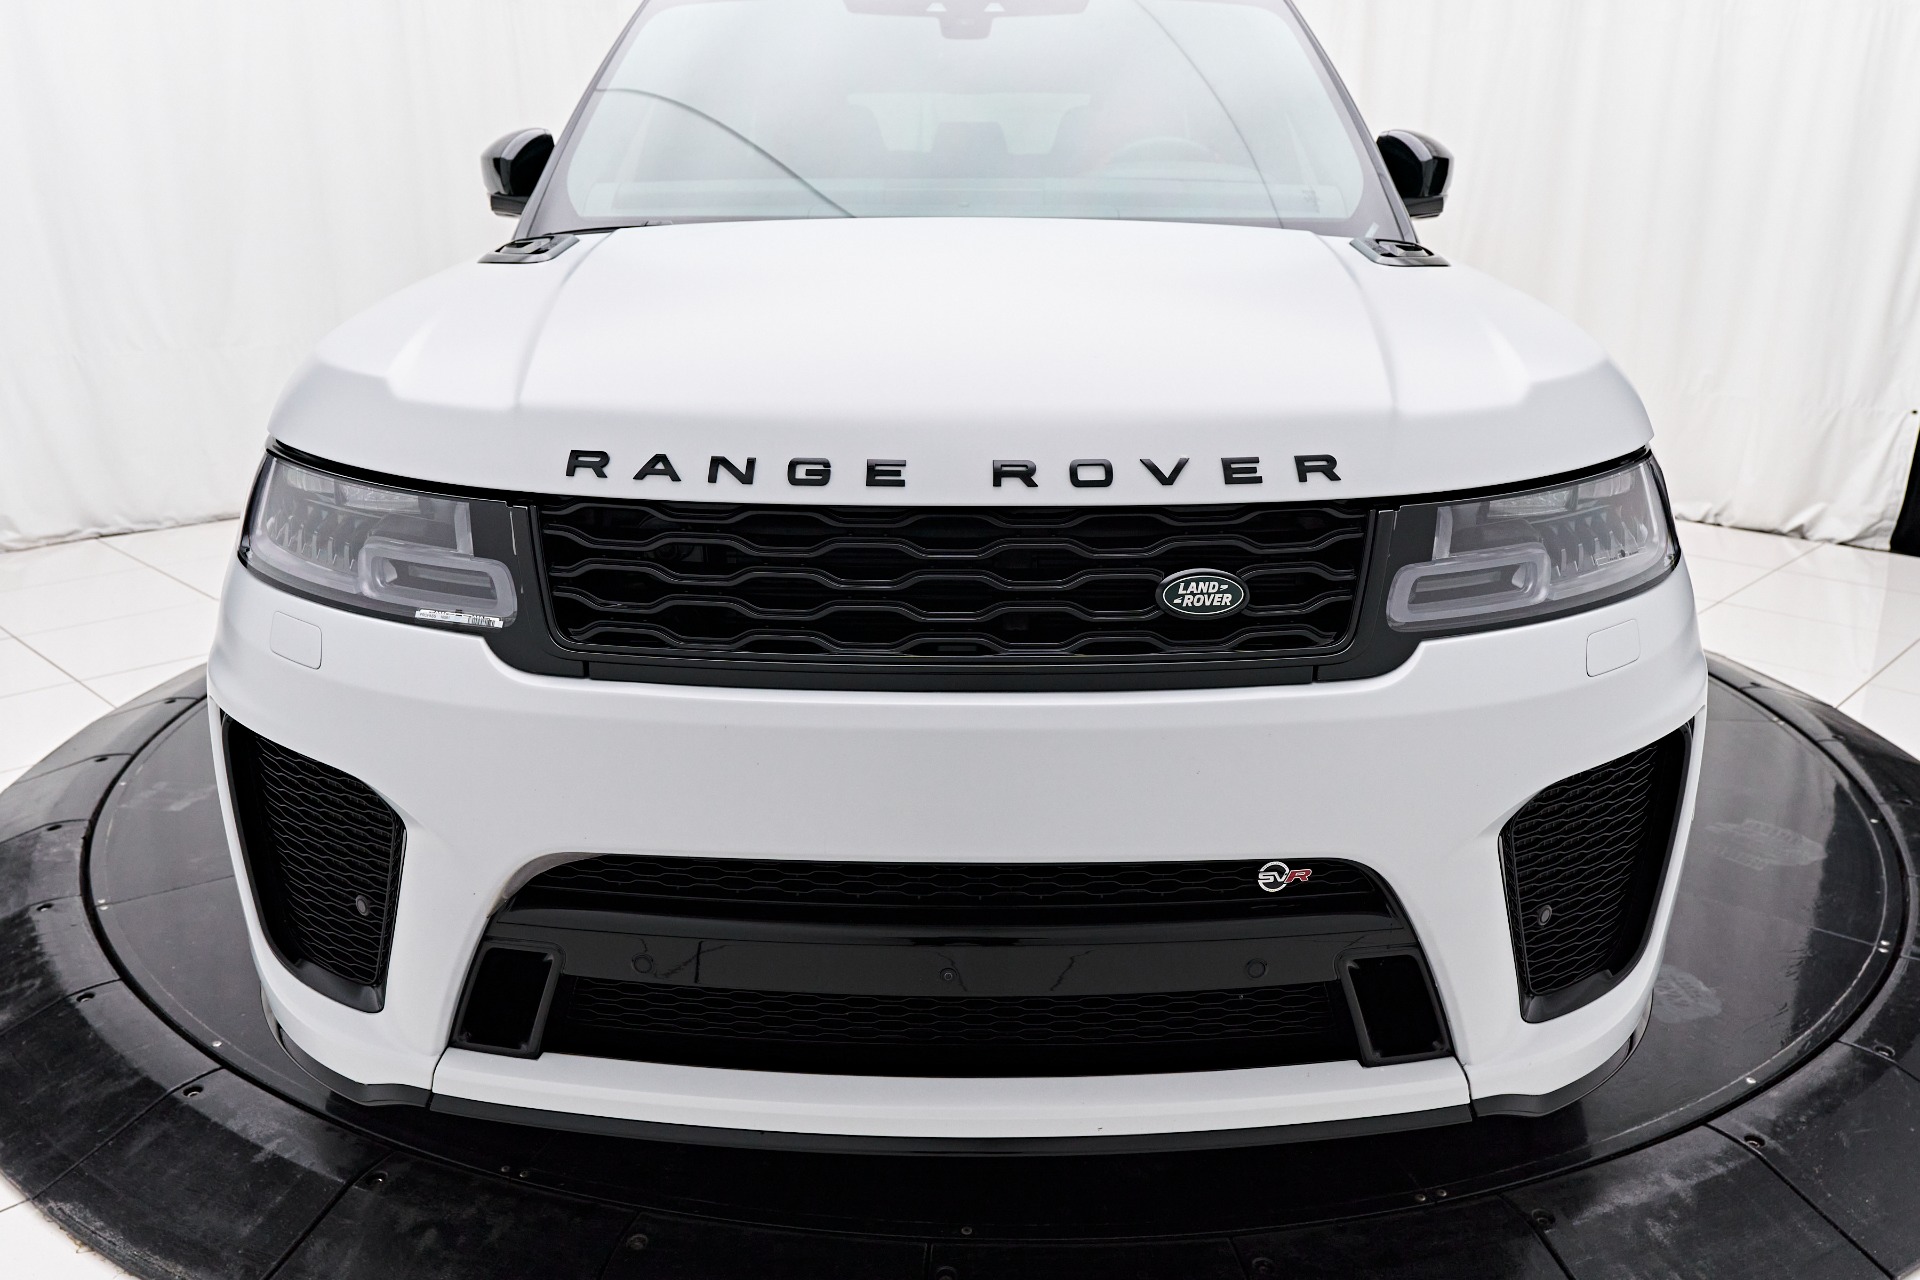 Used 2018 Land Rover Range Rover Sport HSE Dynamic $87k+MSRP! Panoramic  Roof! Soft Close Doors! Gorgeous! For Sale (Special Pricing)